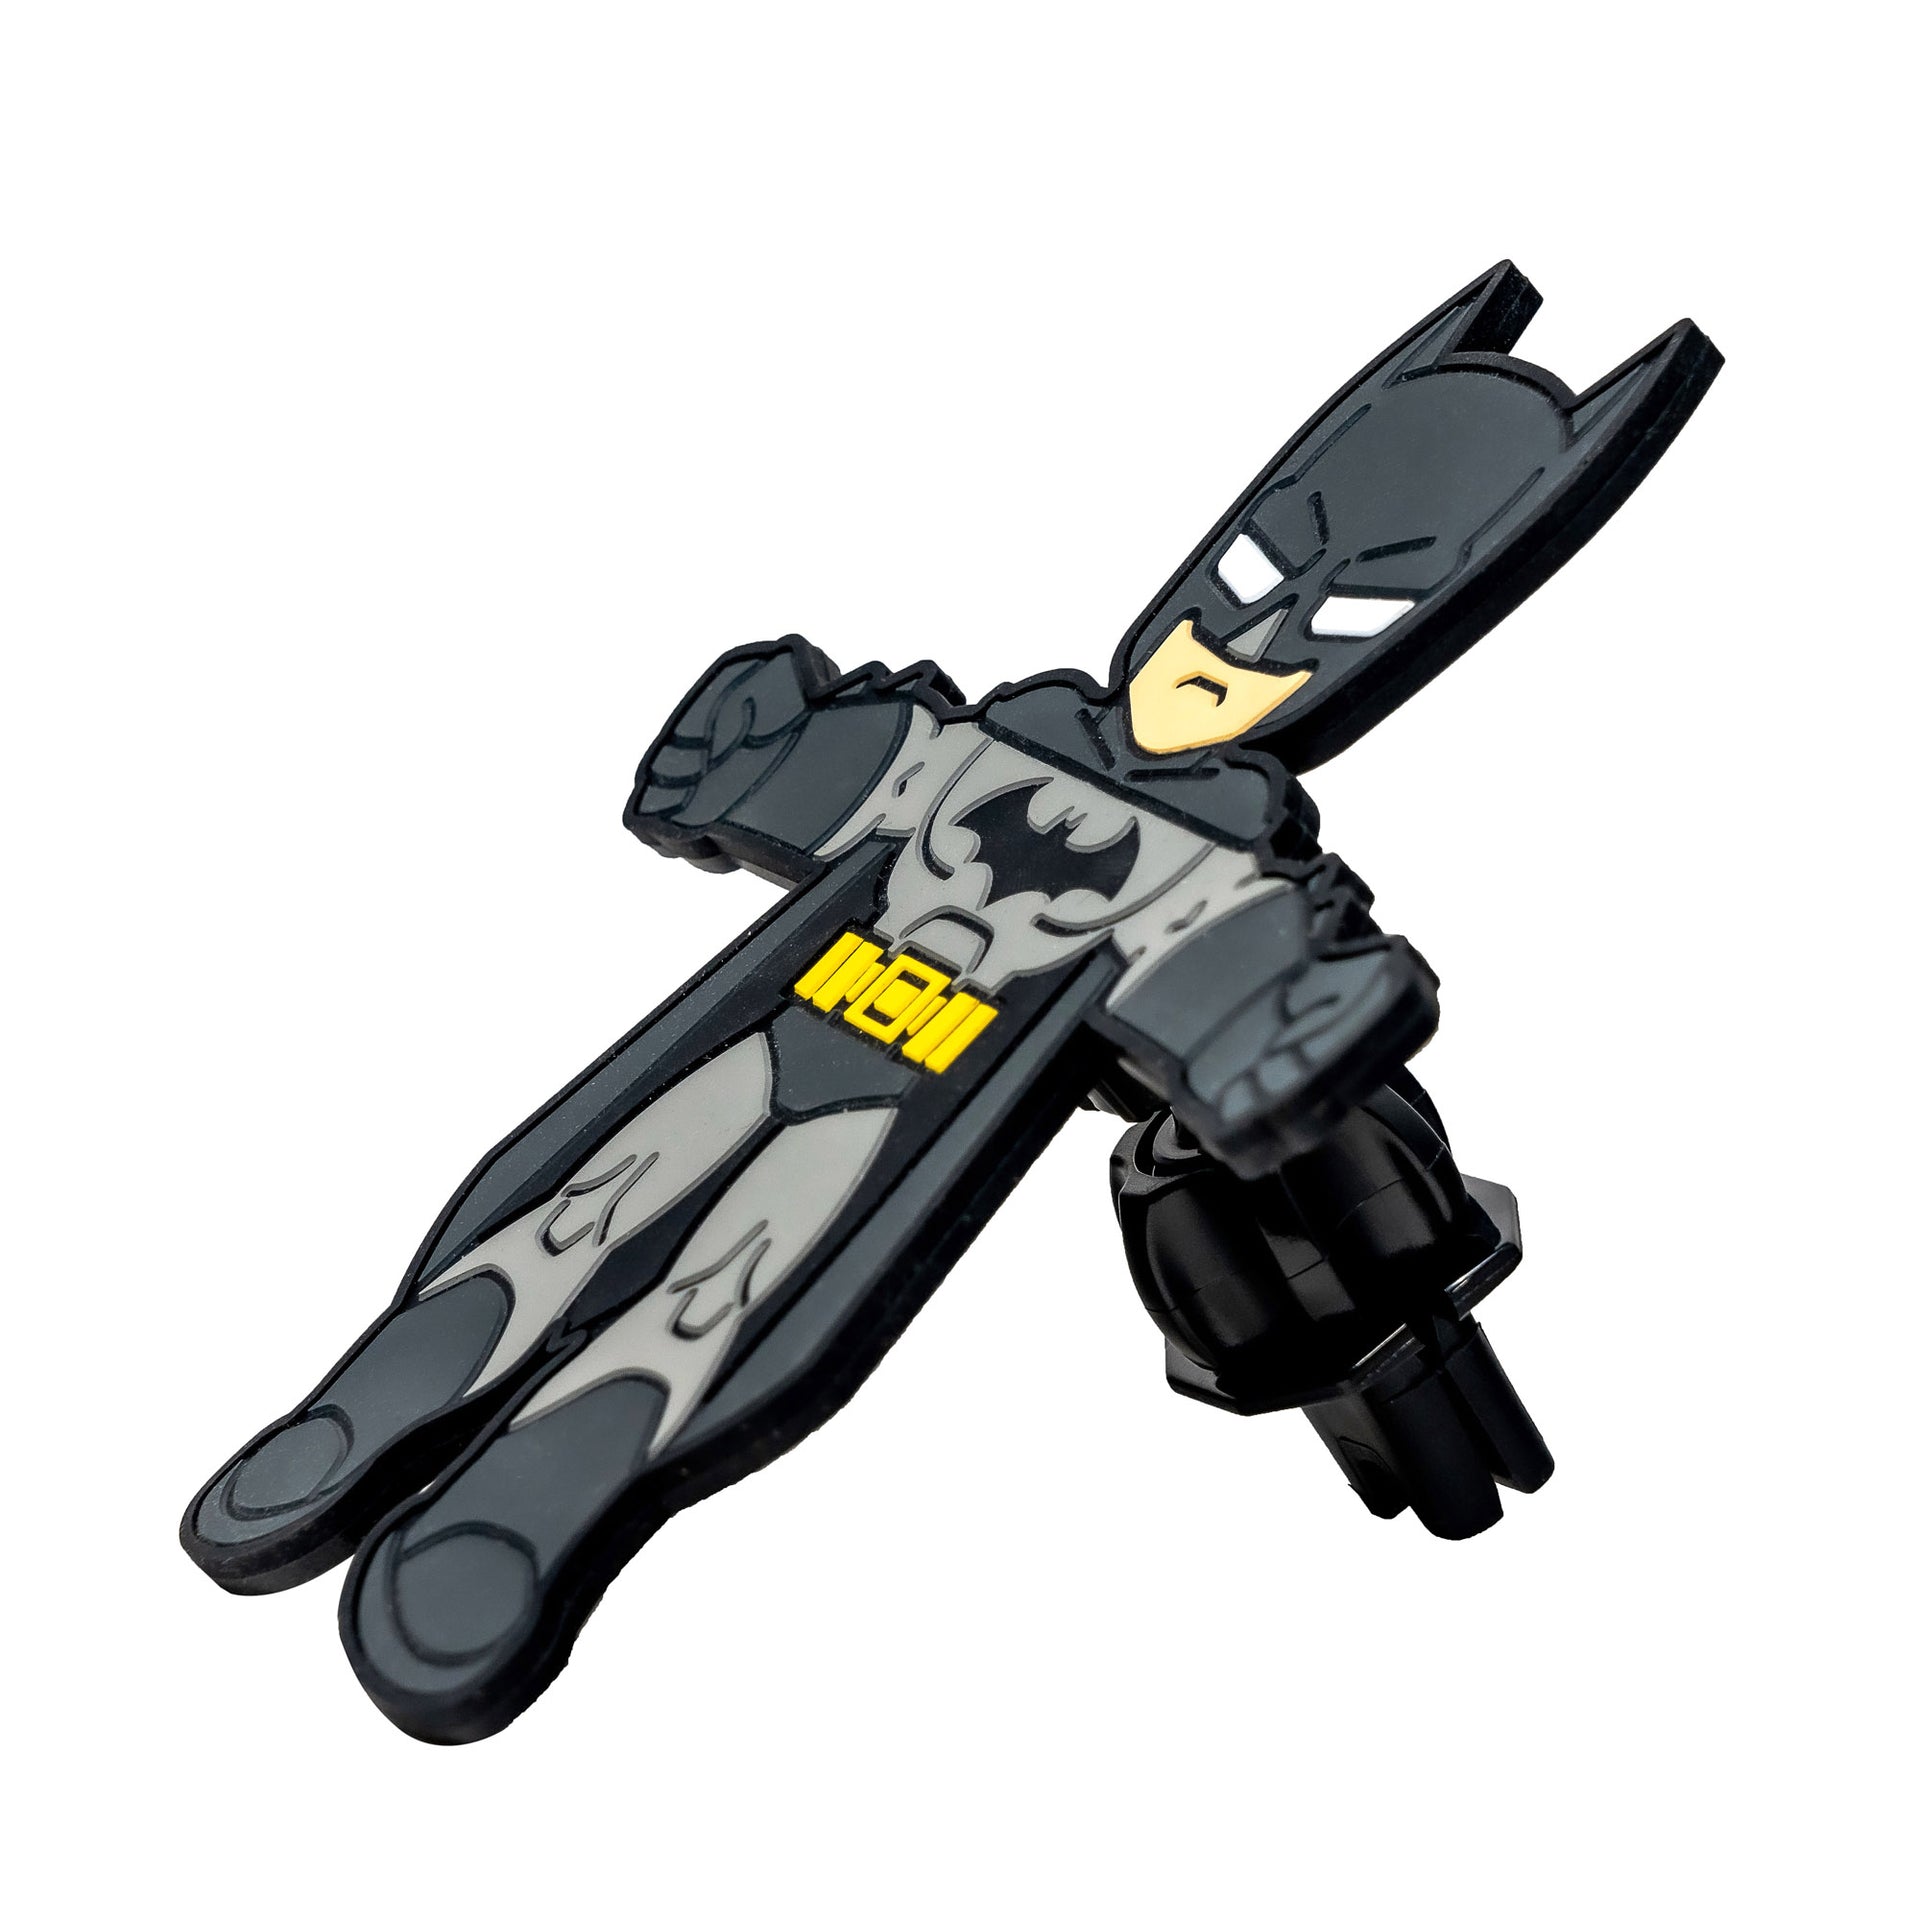 Image of Batman Hug Buddy on a white background sitting on its side, supported by its vent clip.